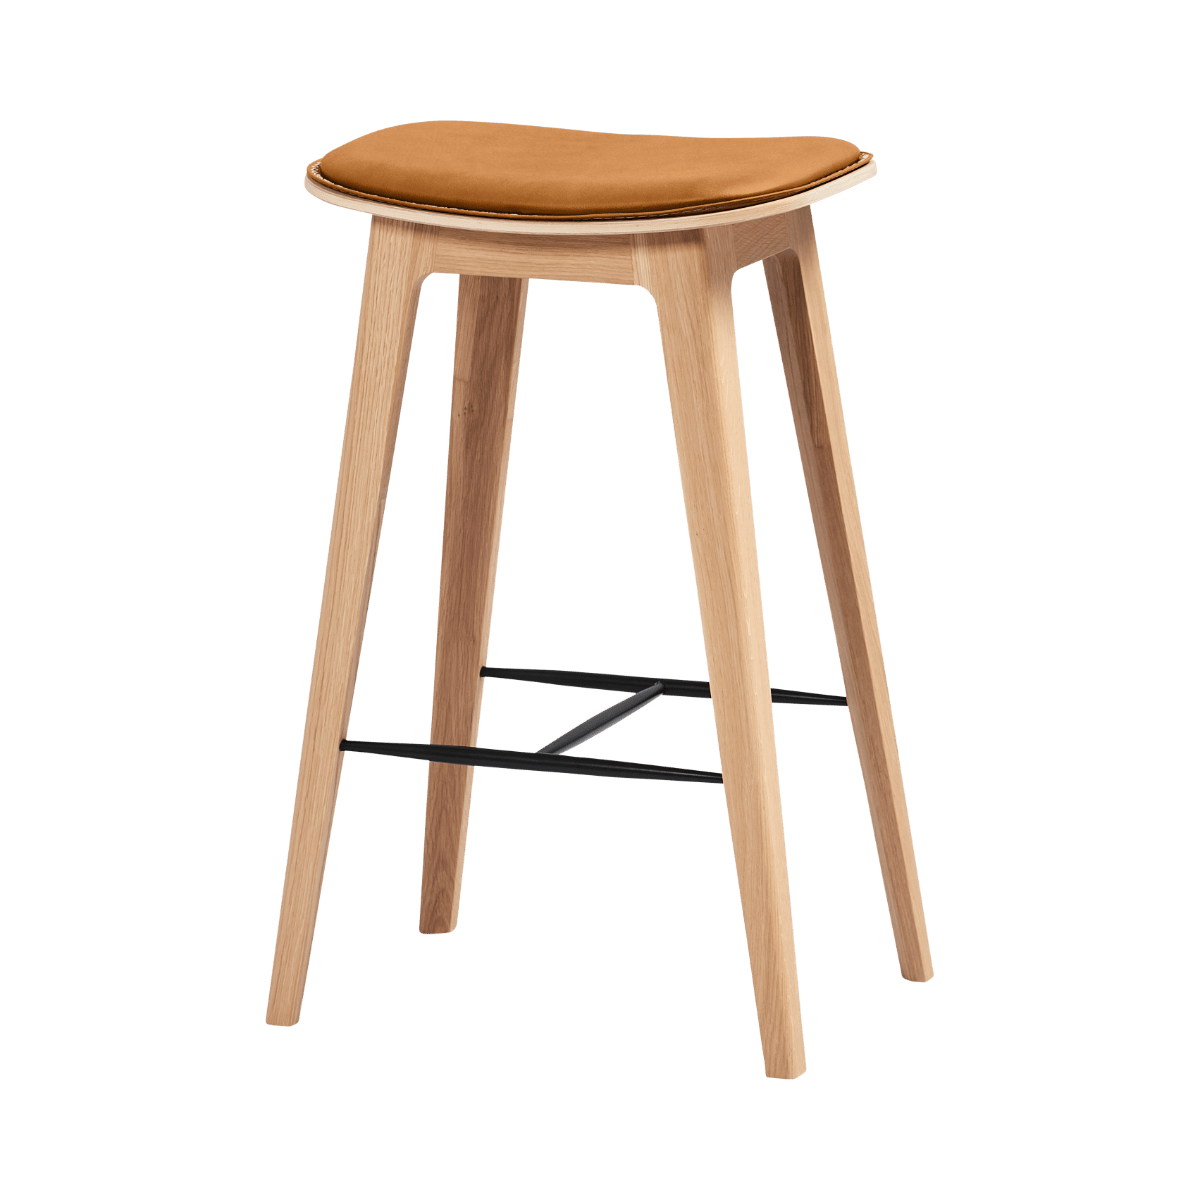 variant_8593224% | Nordic Bar Stool - Oak with stitches [Contract] - 68 cm Luna Sandstone | SACKit